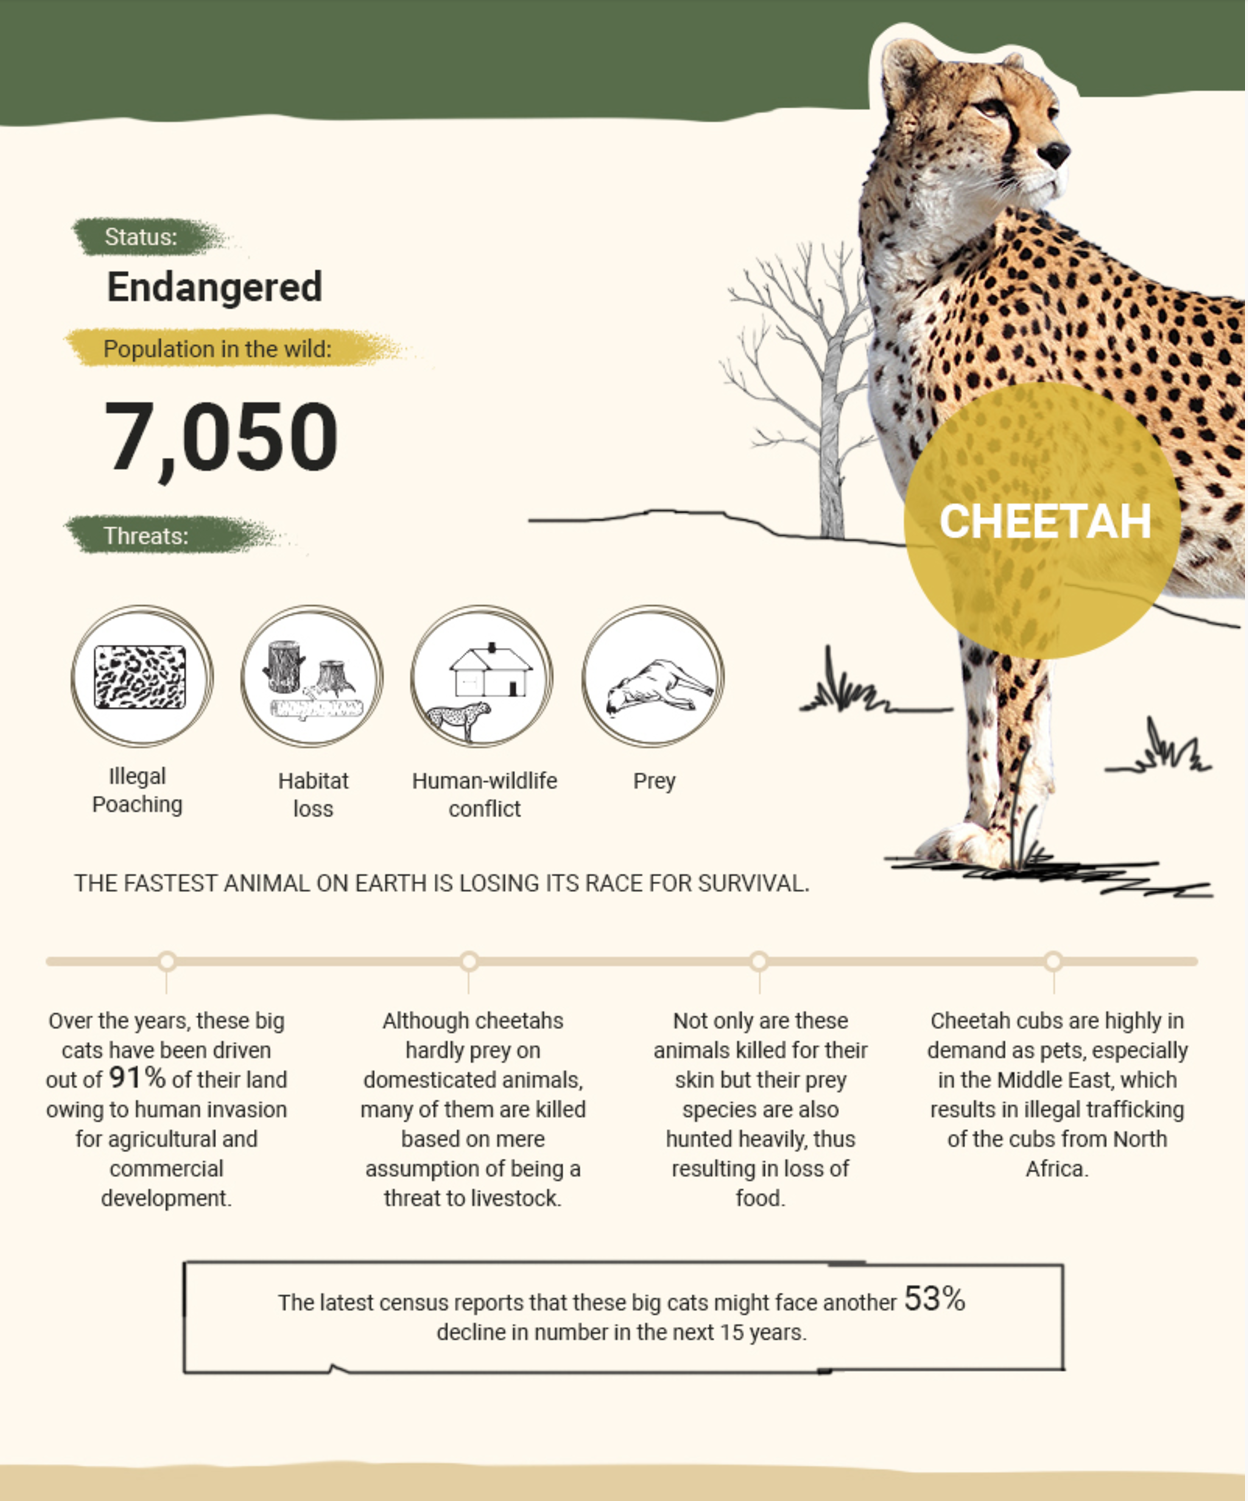 The Next Ten Years: Africa's most endangered species